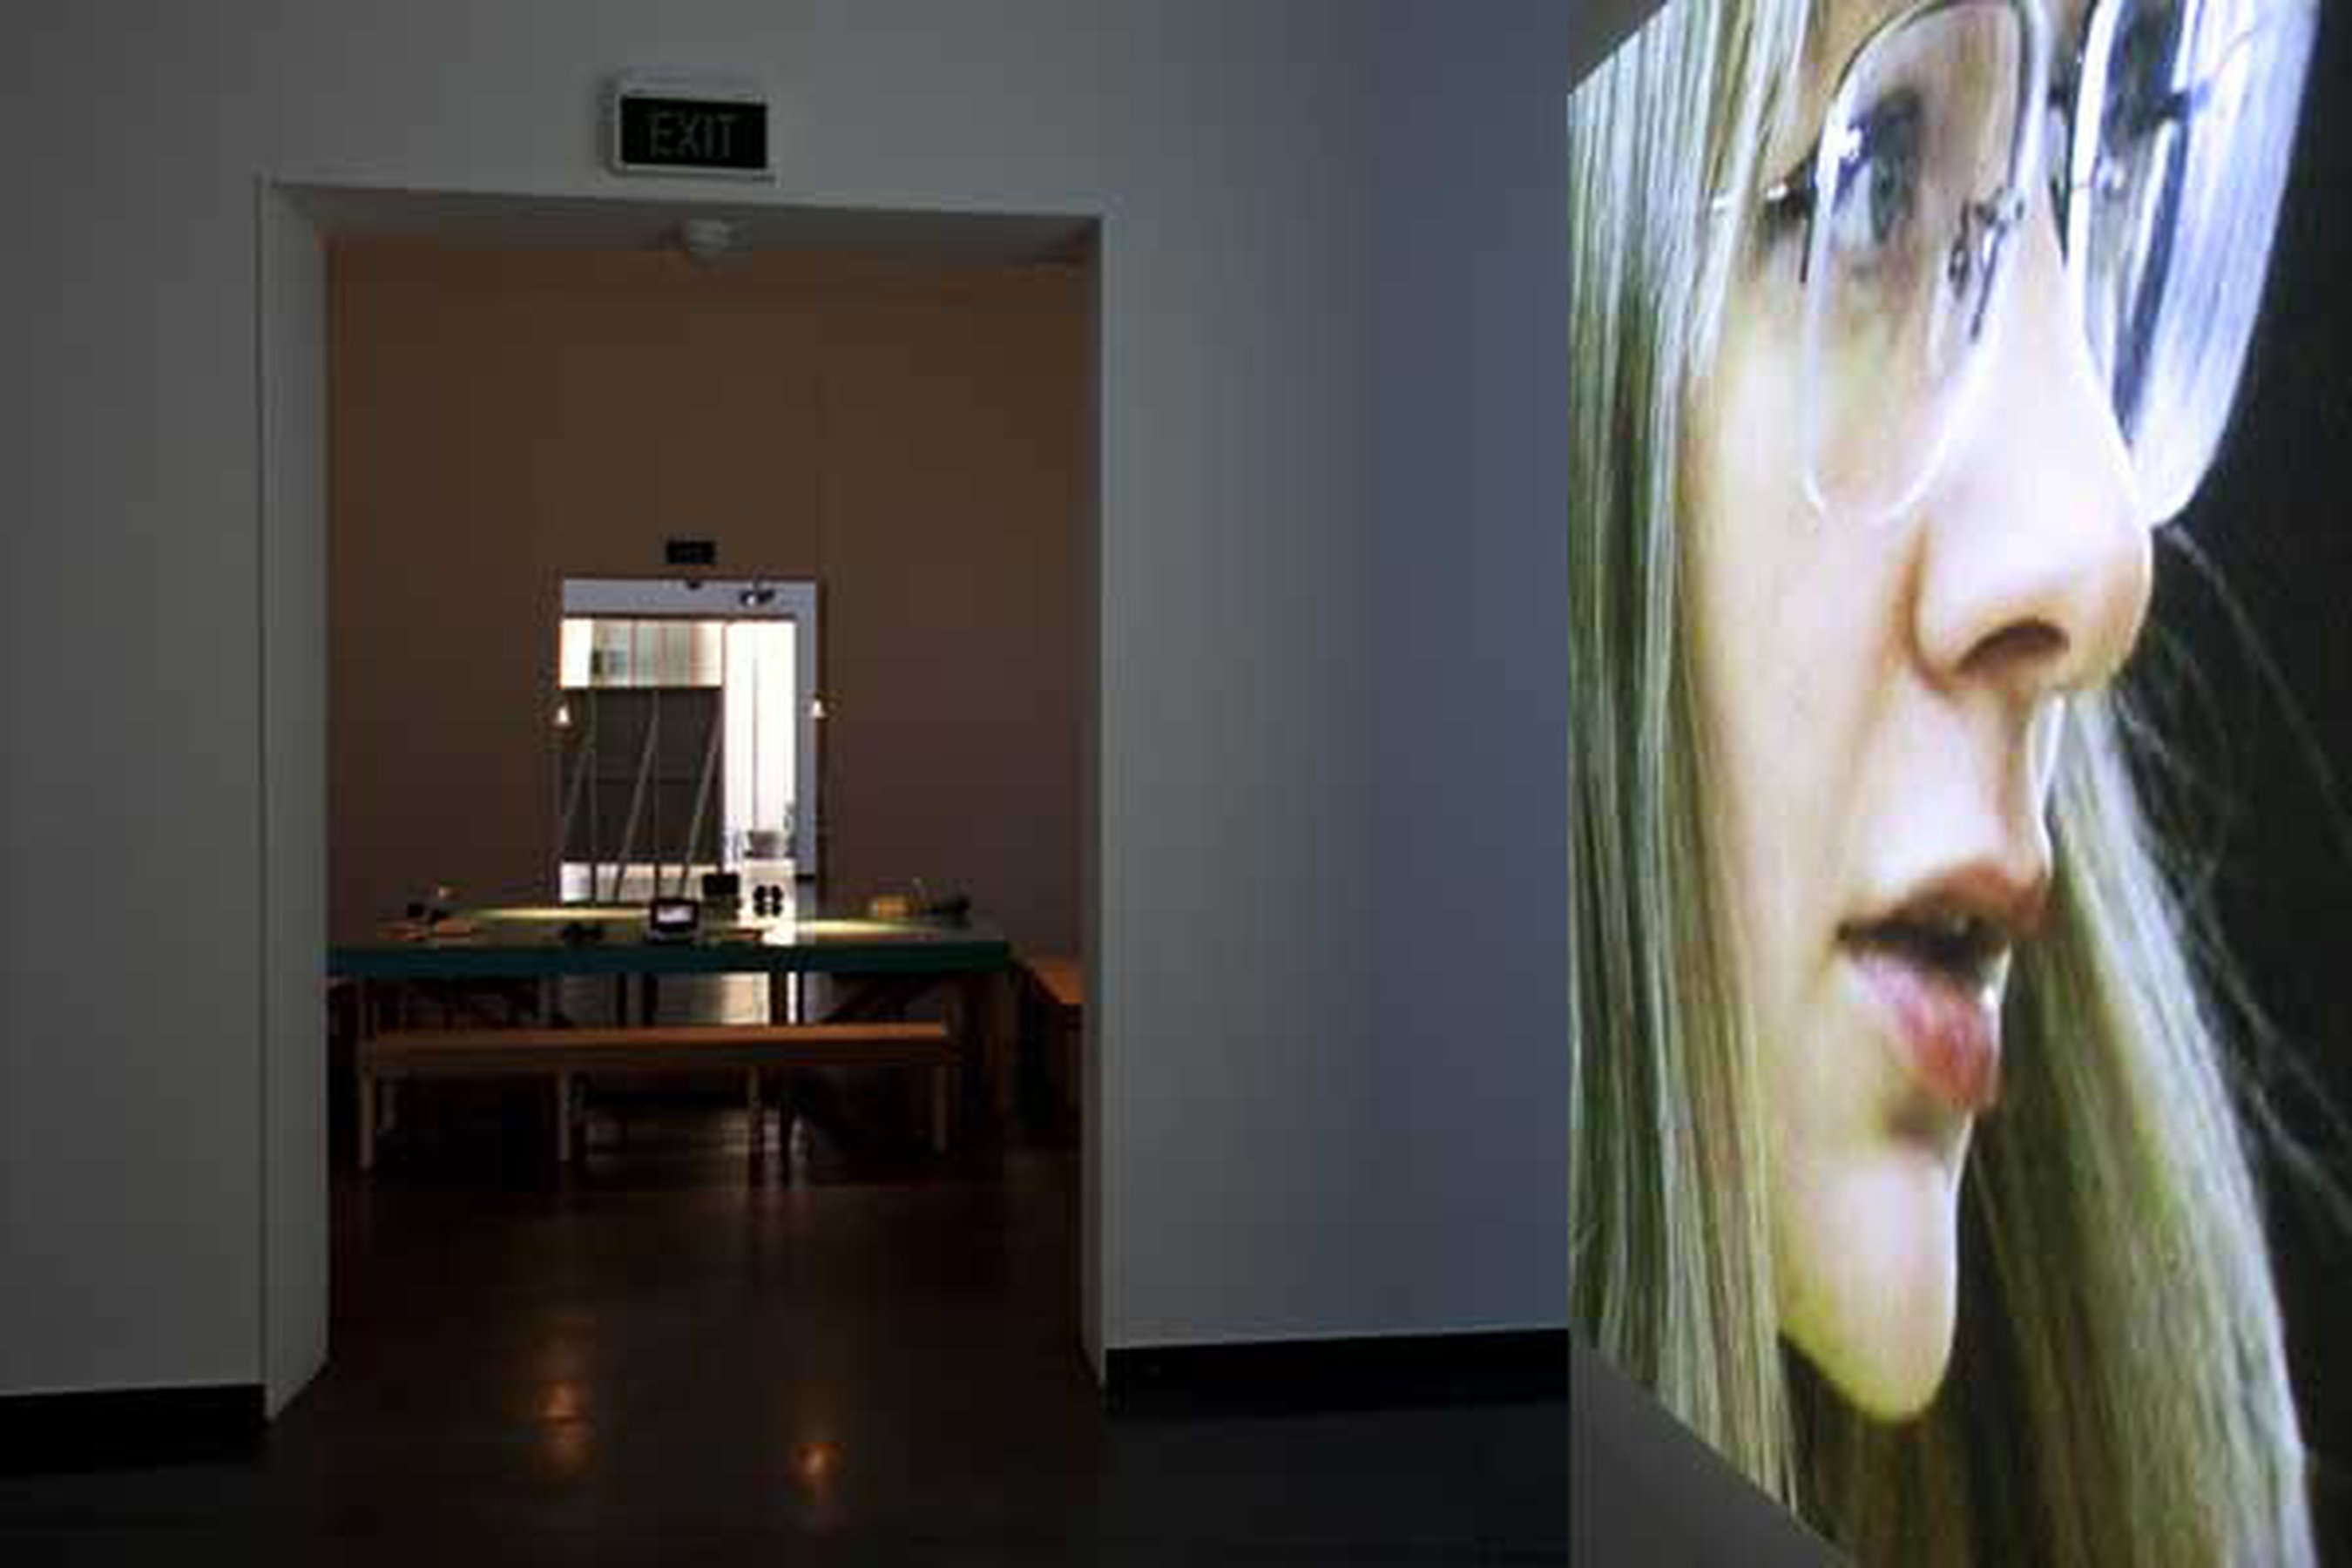 Project for a revolution, 2000 DV - 3'14" loop, installation view, Acca, Melbourne, 2010